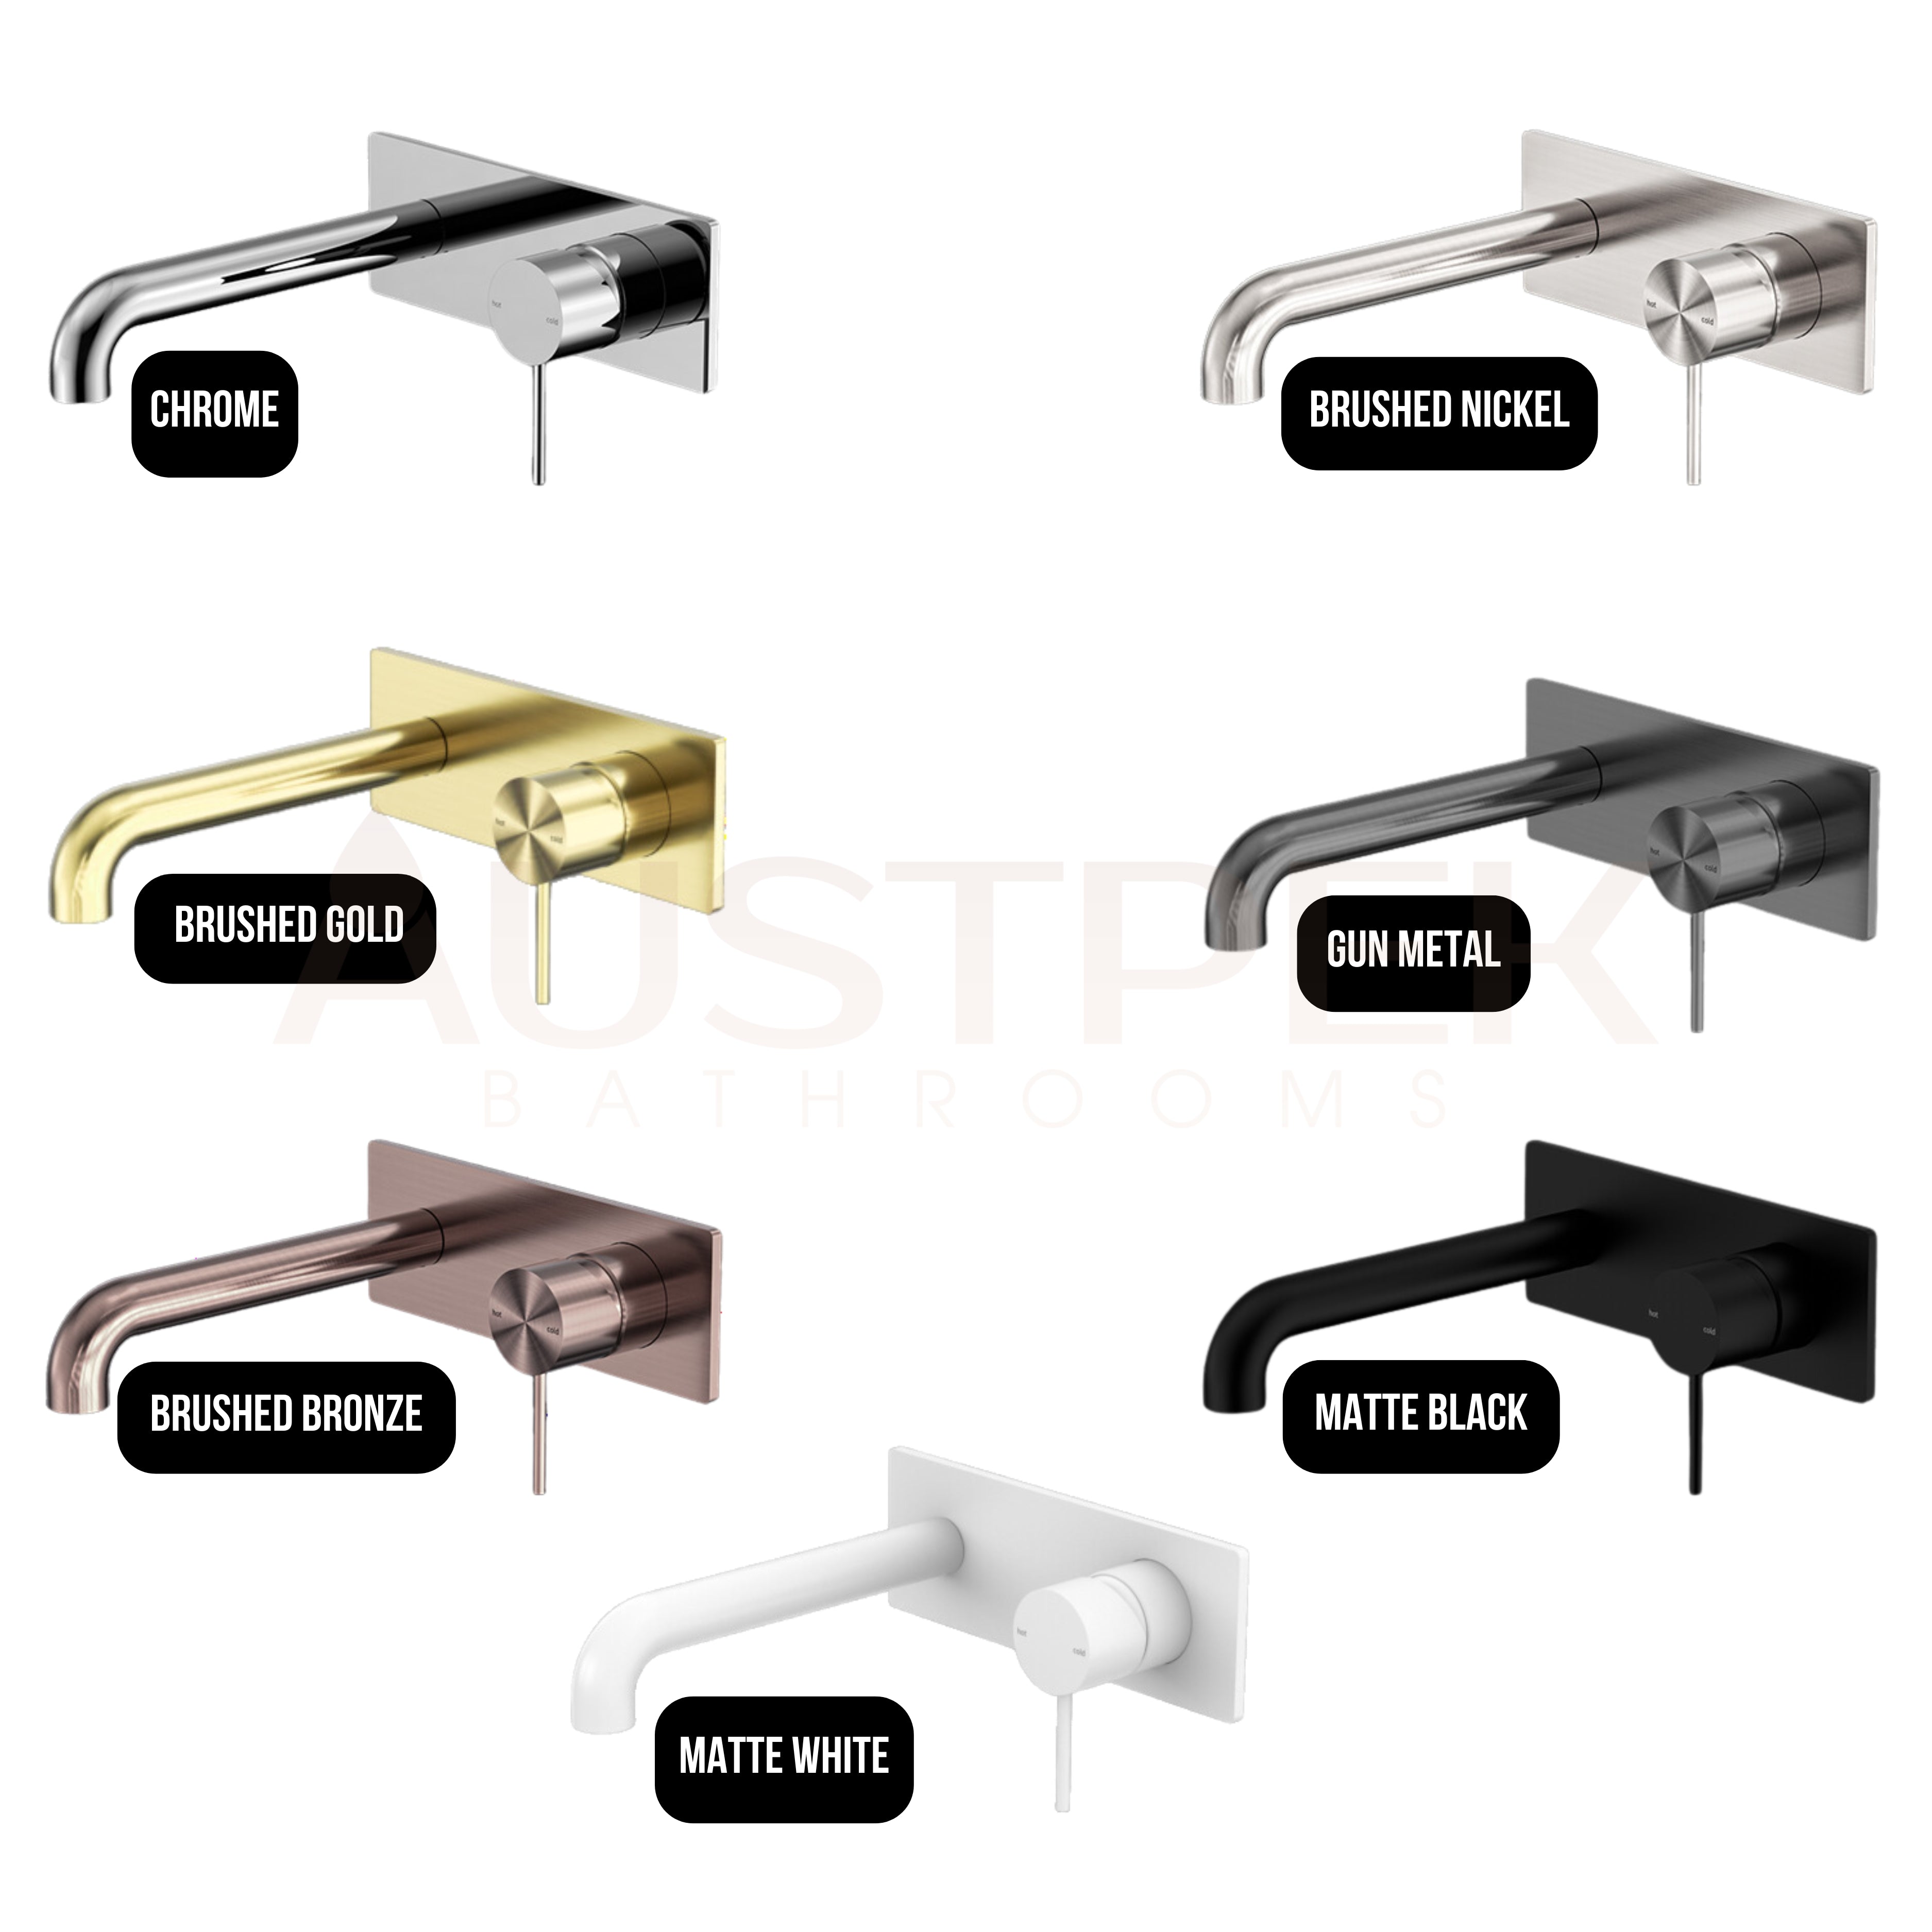 NERO MECCA WALL BASIN/ BATH MIXER BRUSHED NICKEL (AVAILABLE IN 120MM,160MM,185MM, 230MM AND 260MM)